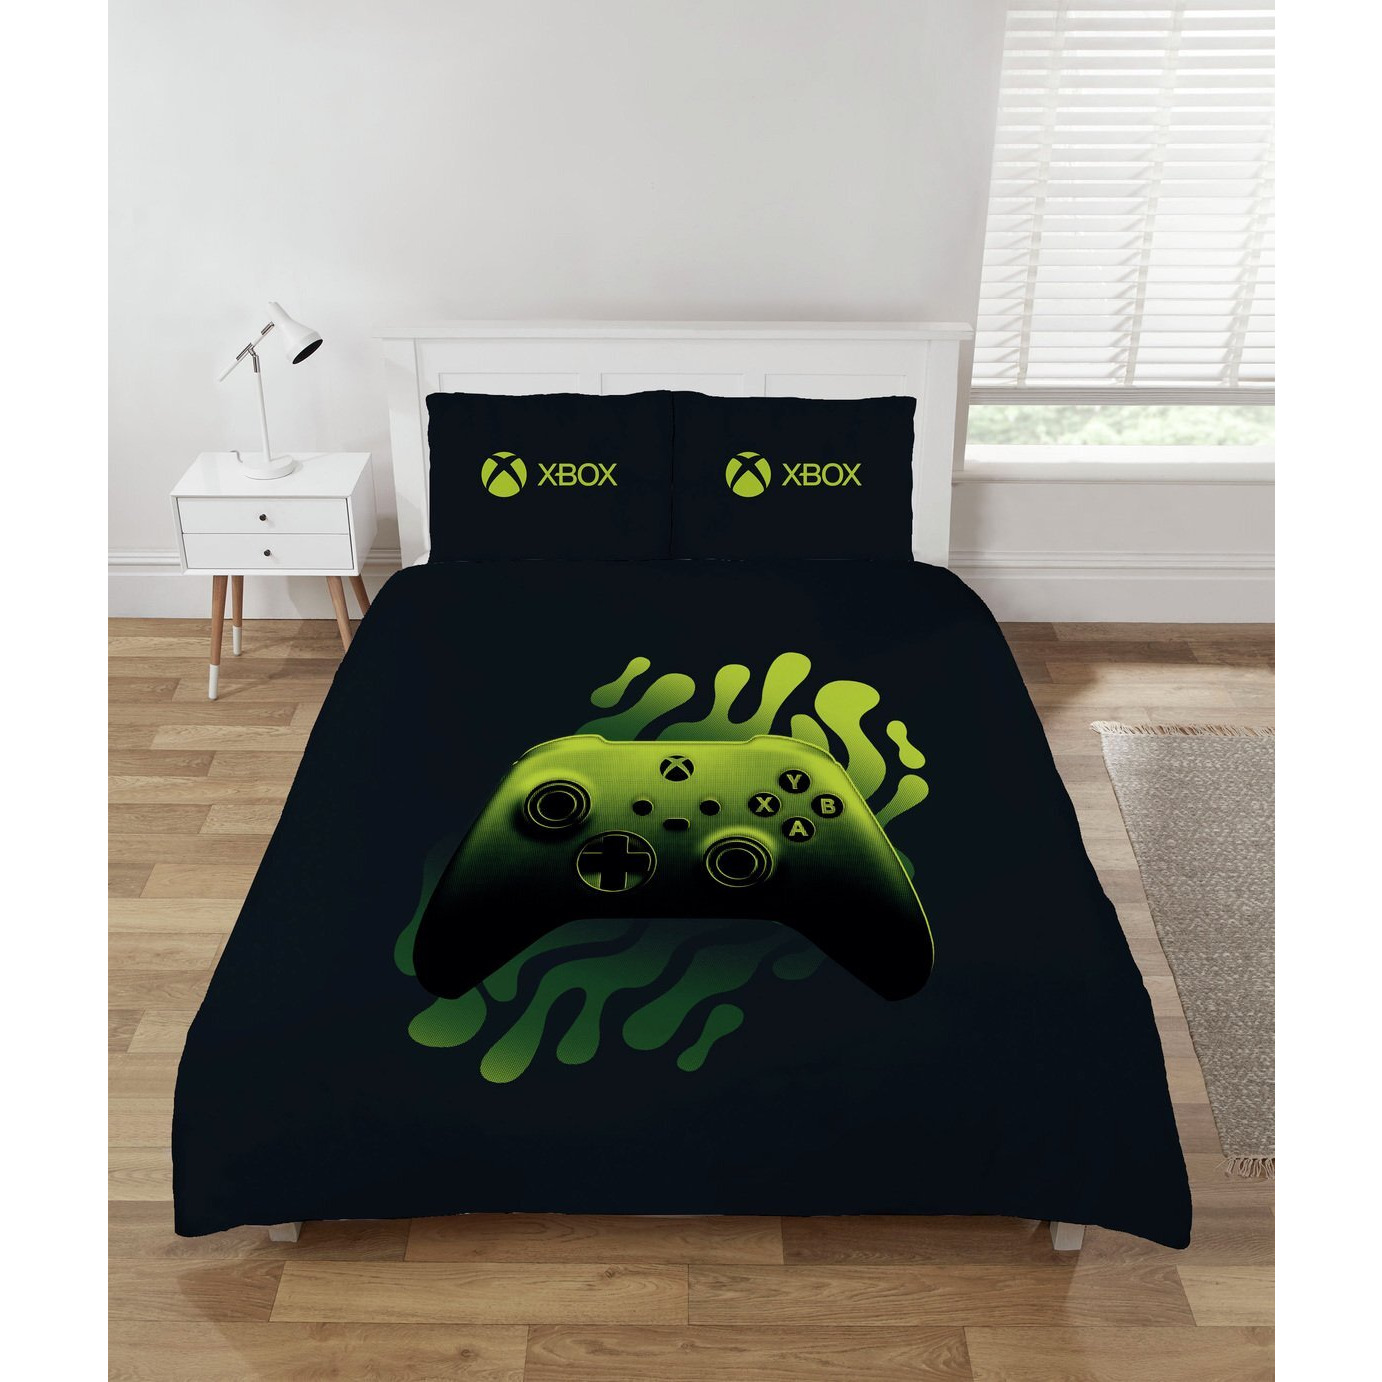 Xbox Pattern Kids Black and Green Bedding Set - Double - image 1